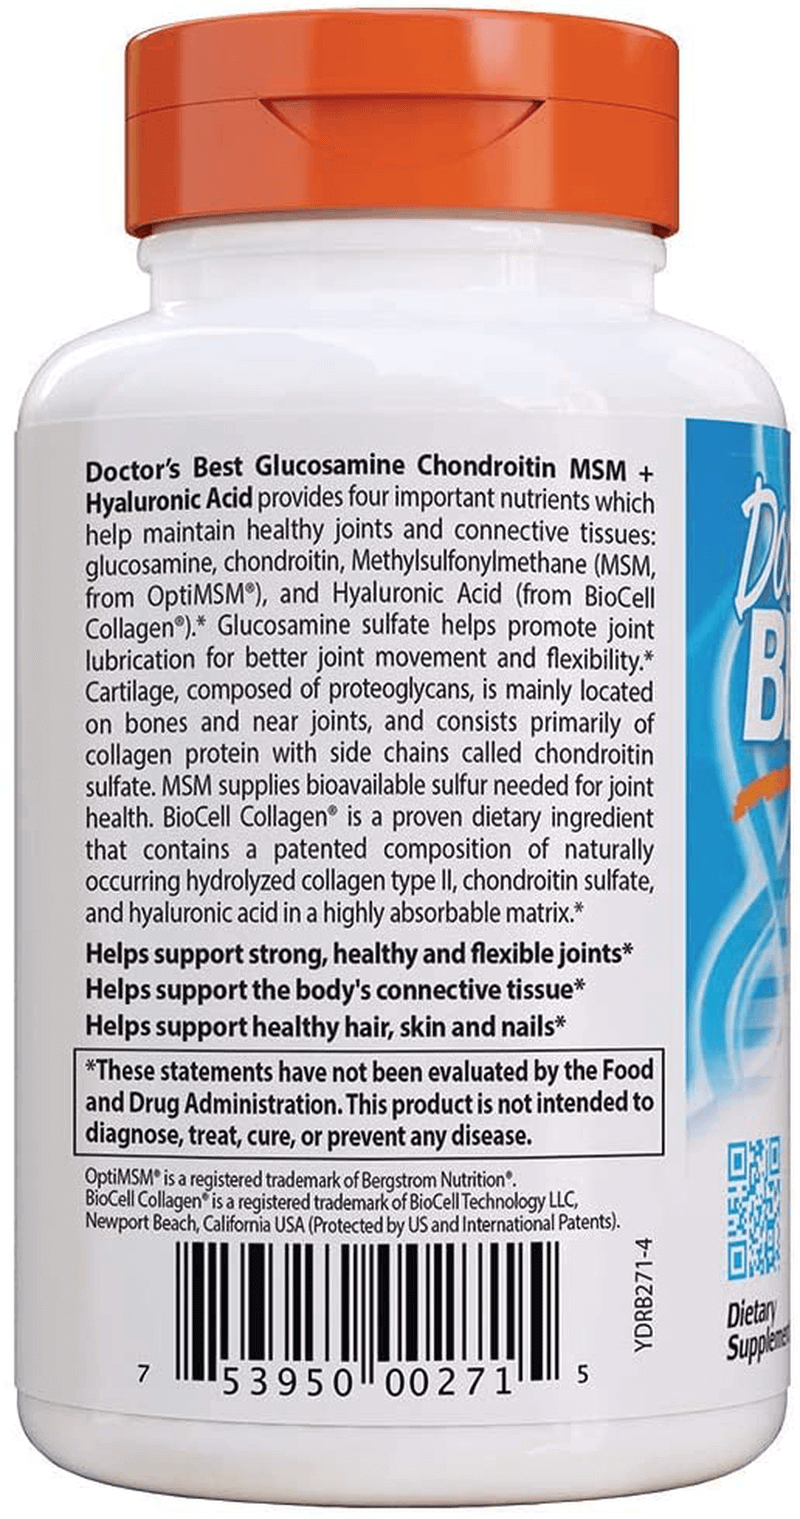 Doctor's Best Glucosamine Chondroitin Msm + Hyaluronic Acid with optimsm & Biocell Collagen, Joint Support, Non-GMO, Gluten Free, Soy Free, 150 Caps - vitamenstore.com